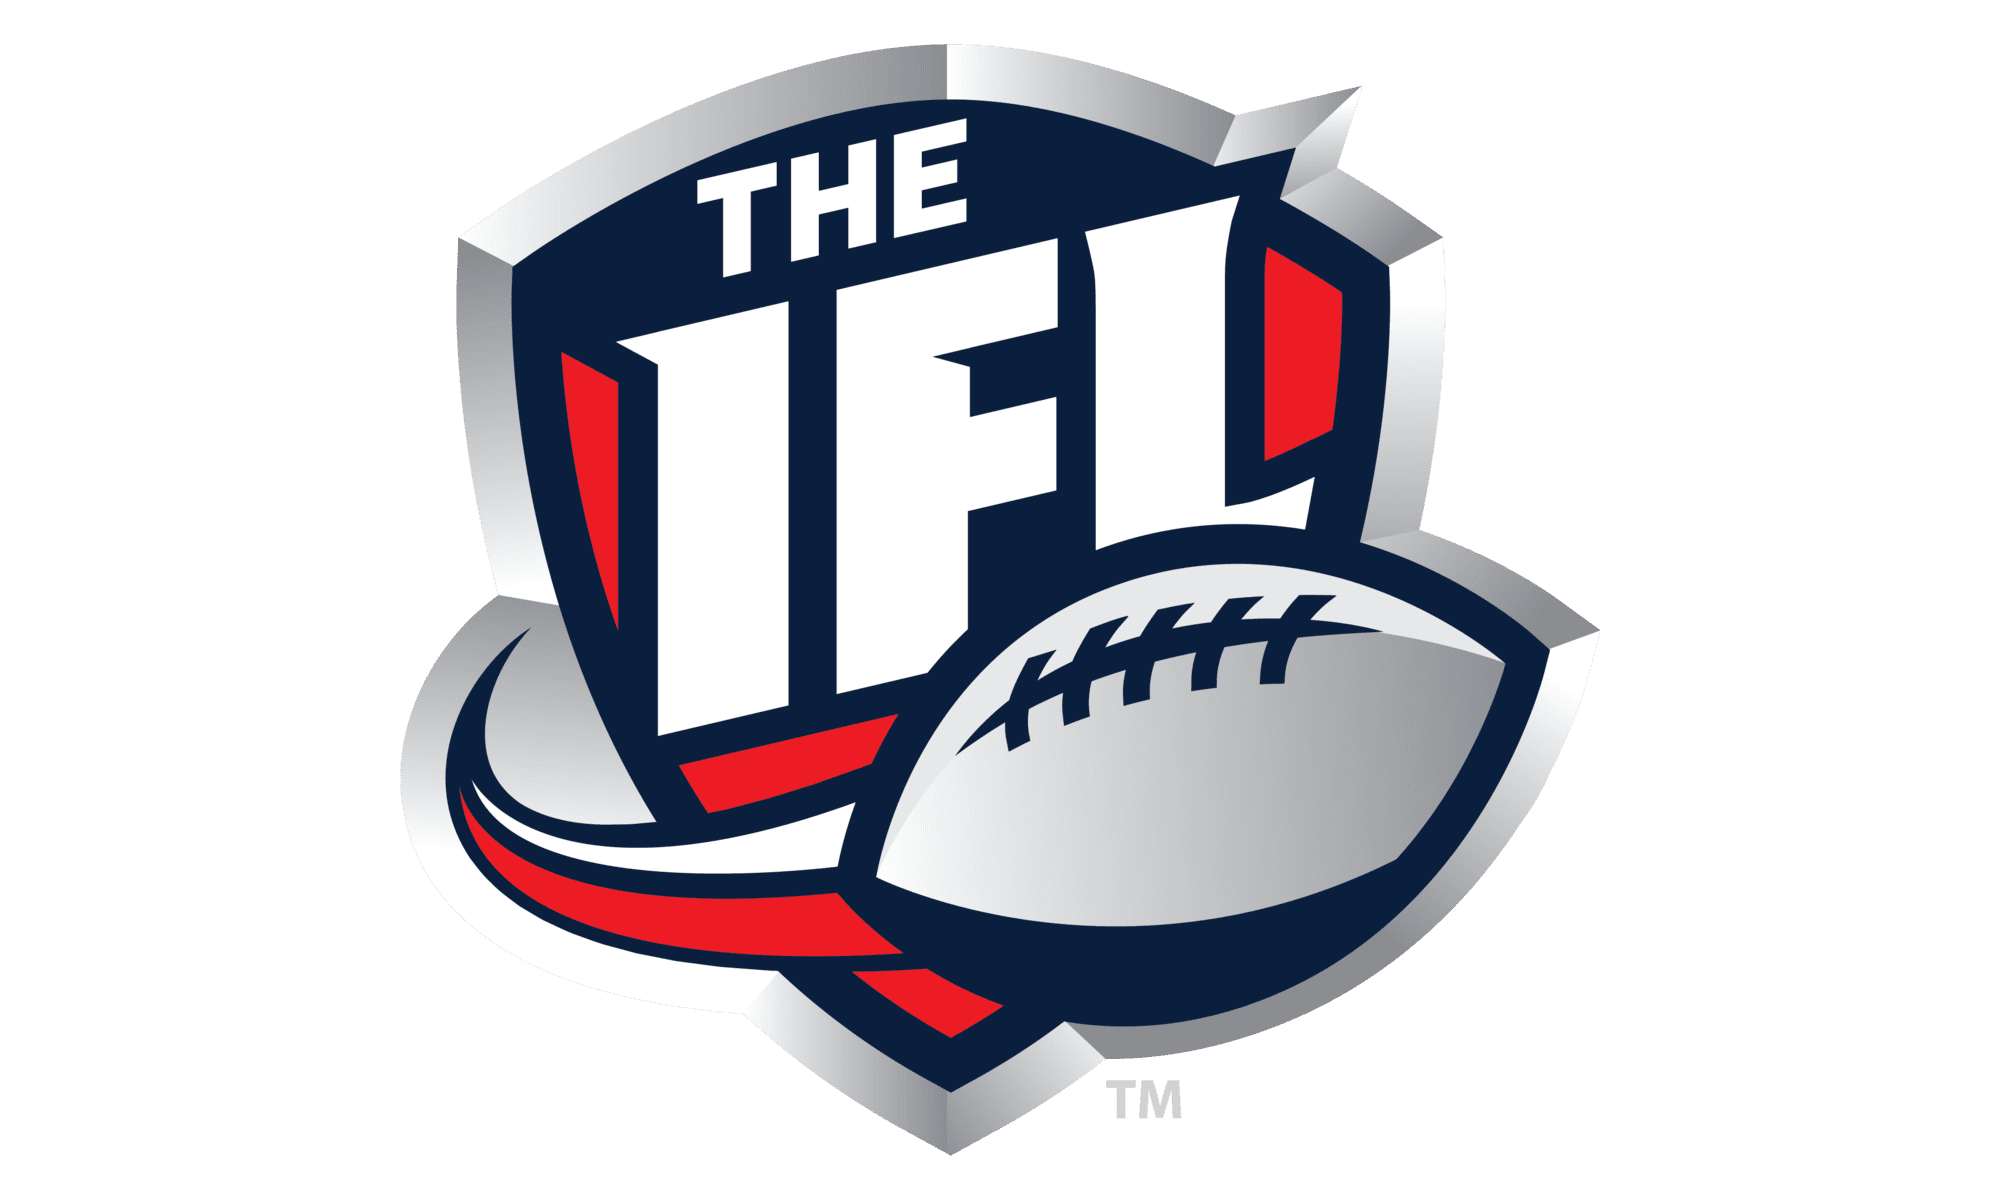 Indoor Football League (IFL) logo and symbol, meaning, history, PNG, brand